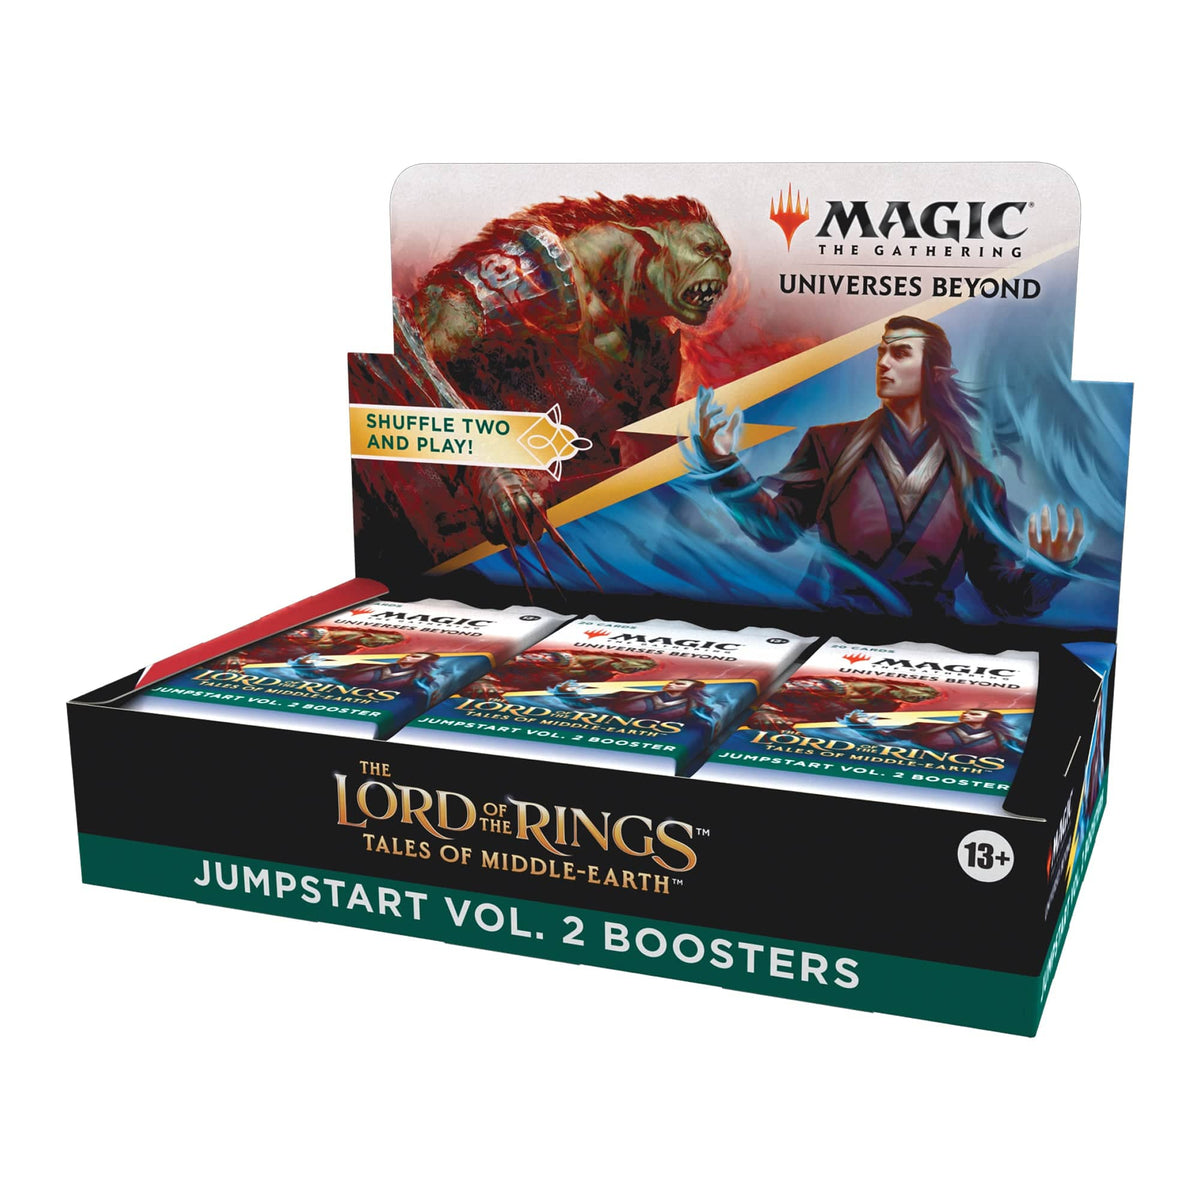 Magic the Gathering - Lord of the Rings Tales of Middle-Earth Jumpstart Vol. 2 Booster Box